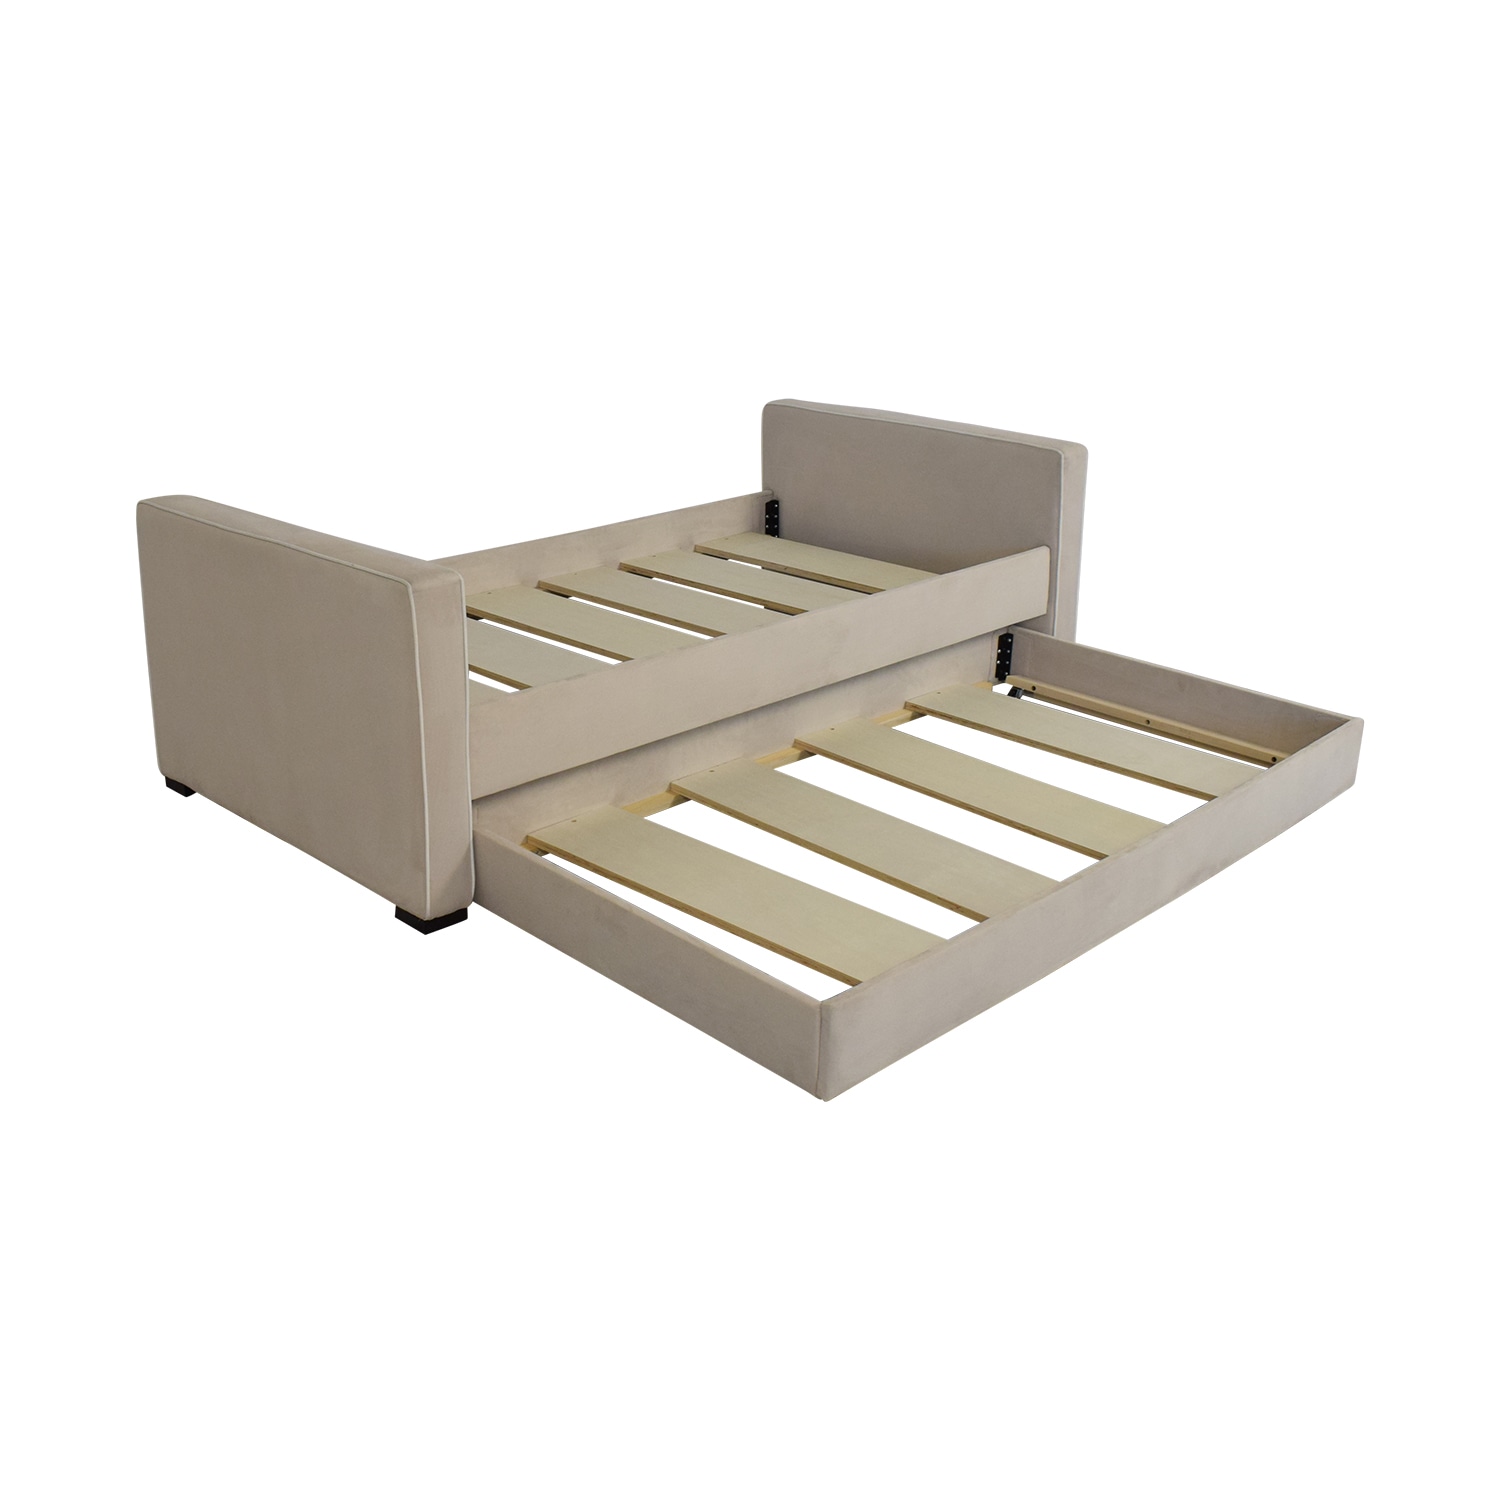 Monte Design Dorma Twin Bed With Trundle | 75% Off | Kaiyo